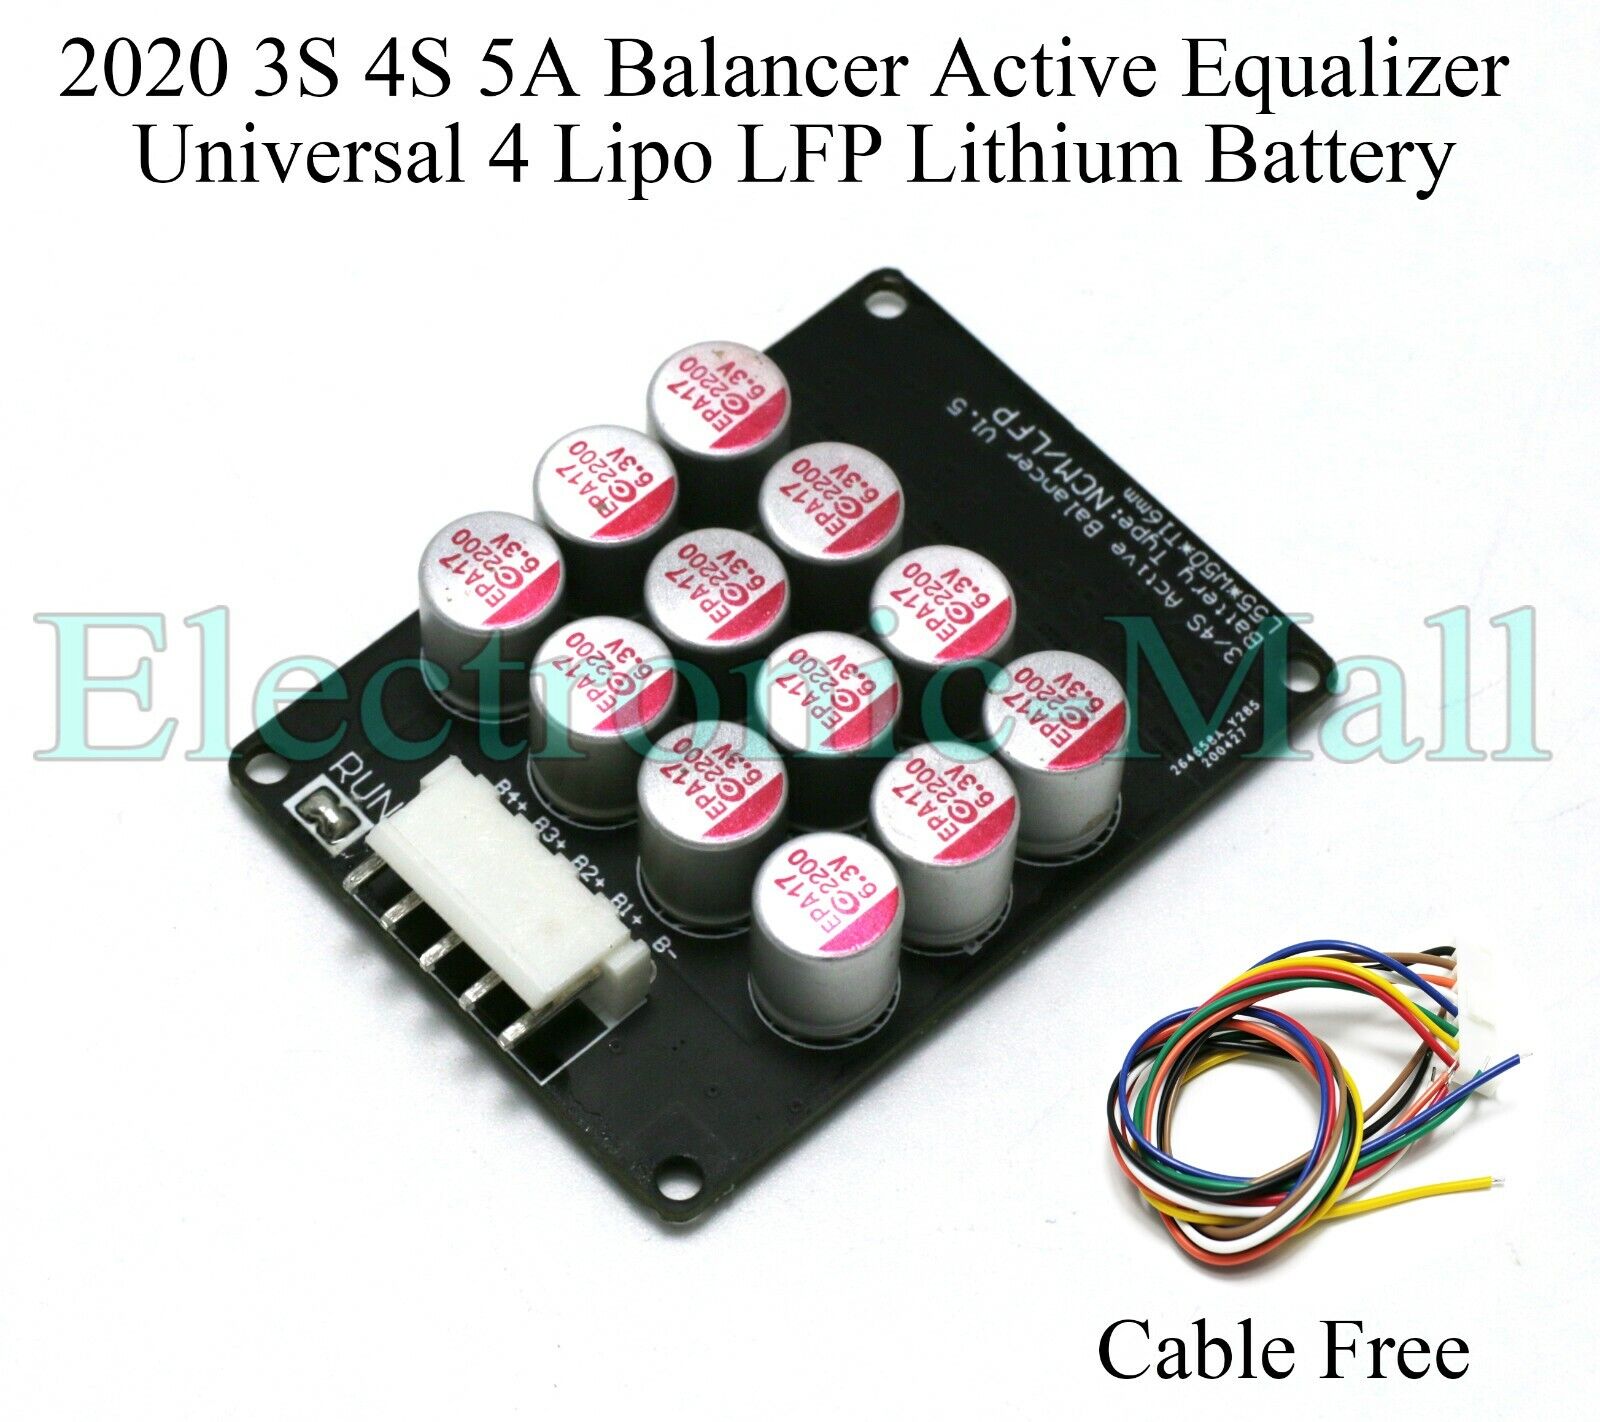 3S 4S 5A Balancer Active Equalizer Universal 4 Lipo LFP Lithium Cells Pack